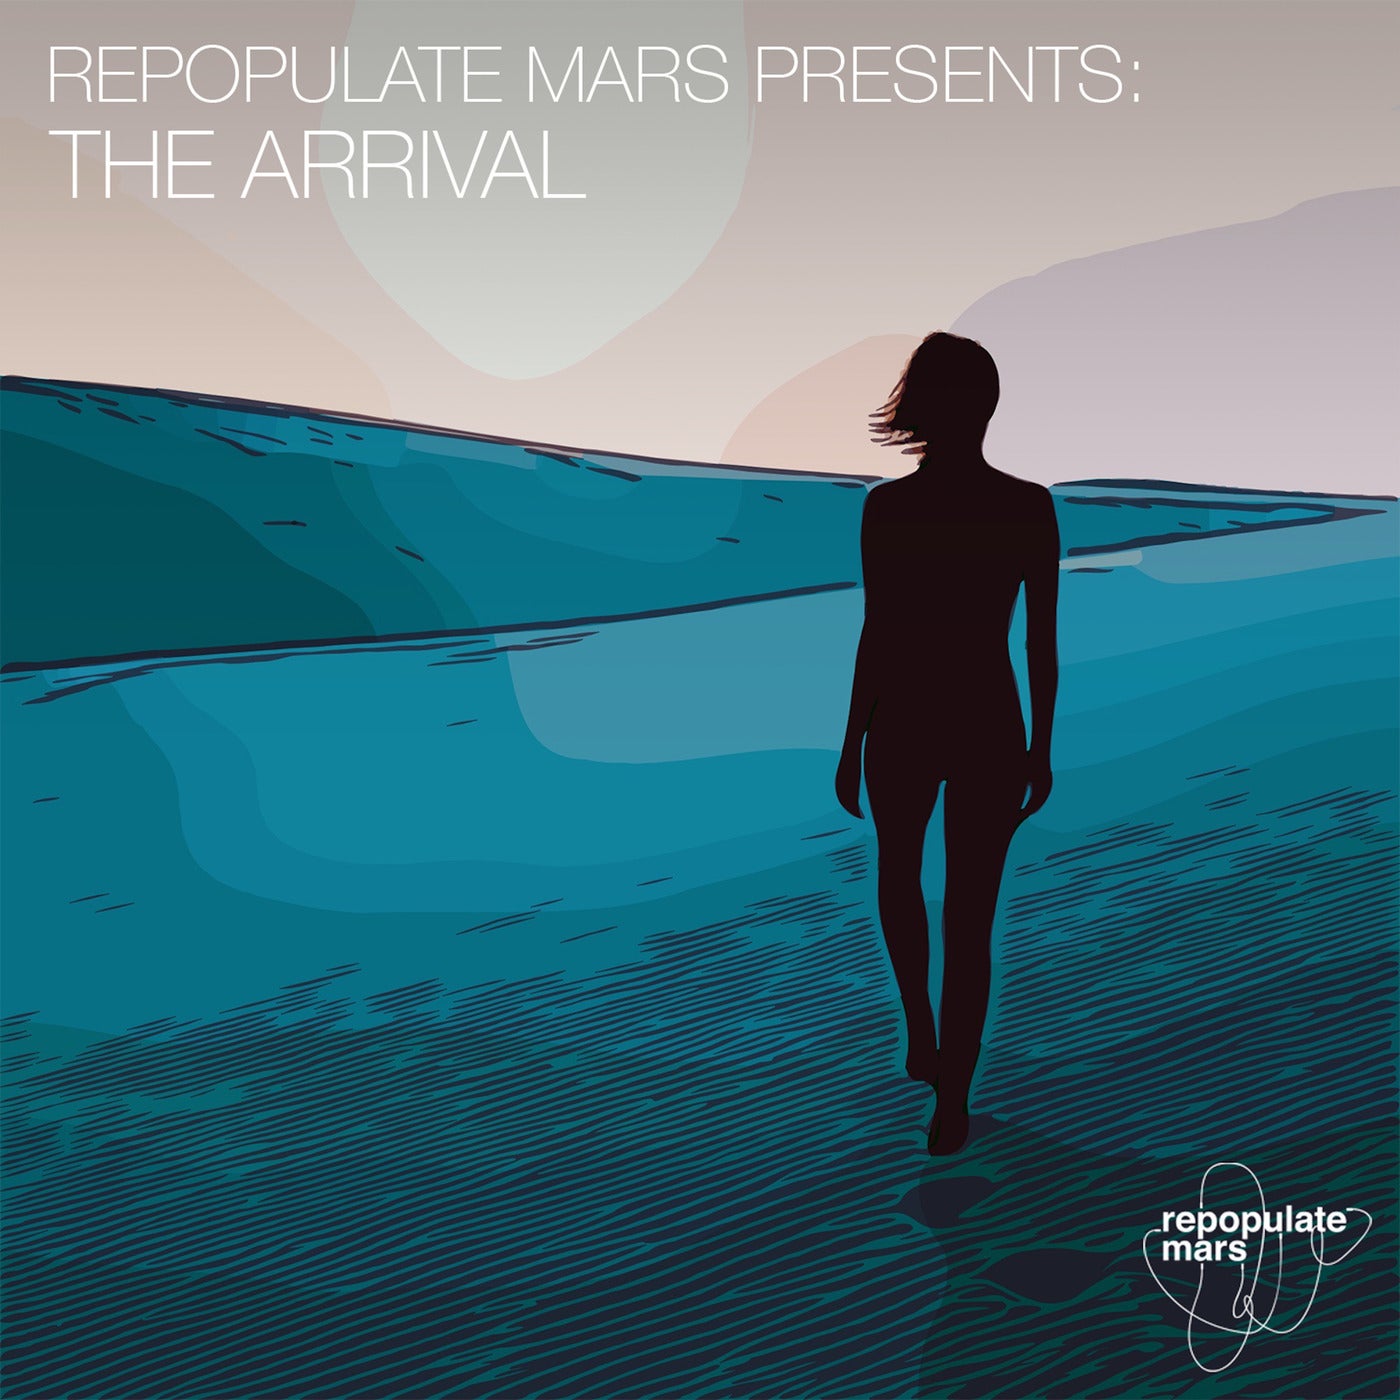 Repopulate Mars presents The Arrival